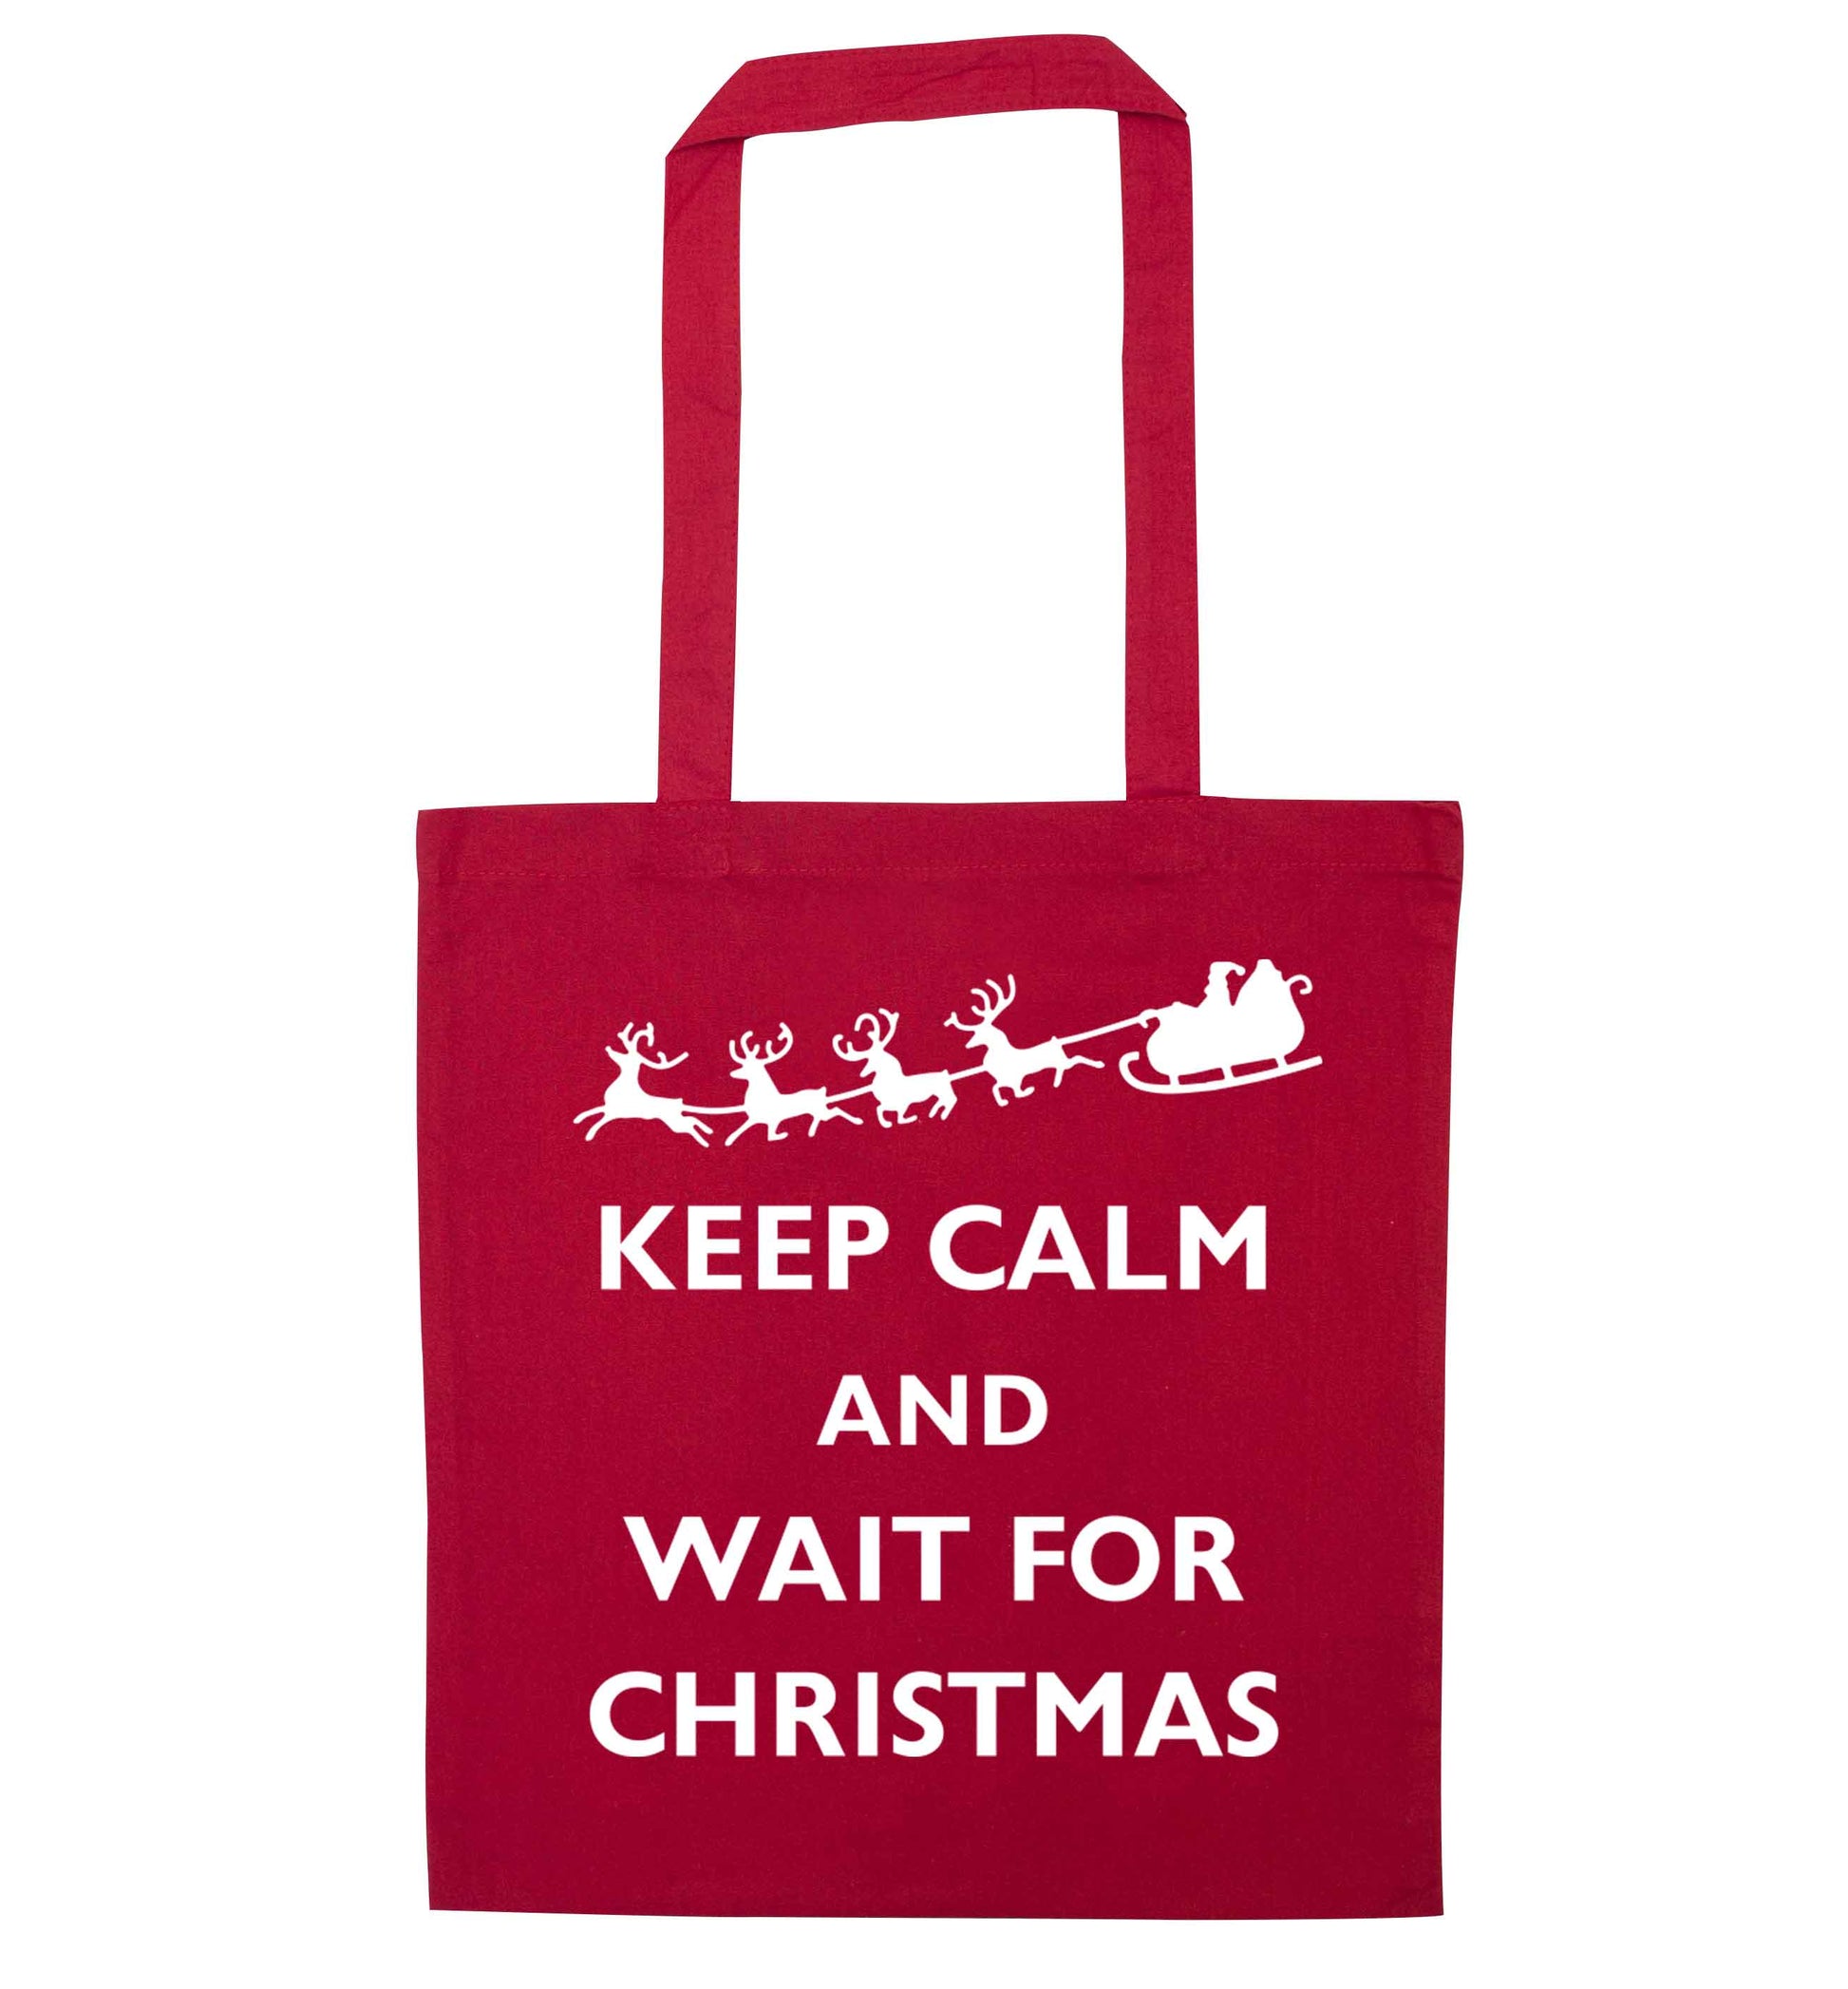 Keep calm and wait for Christmas red tote bag